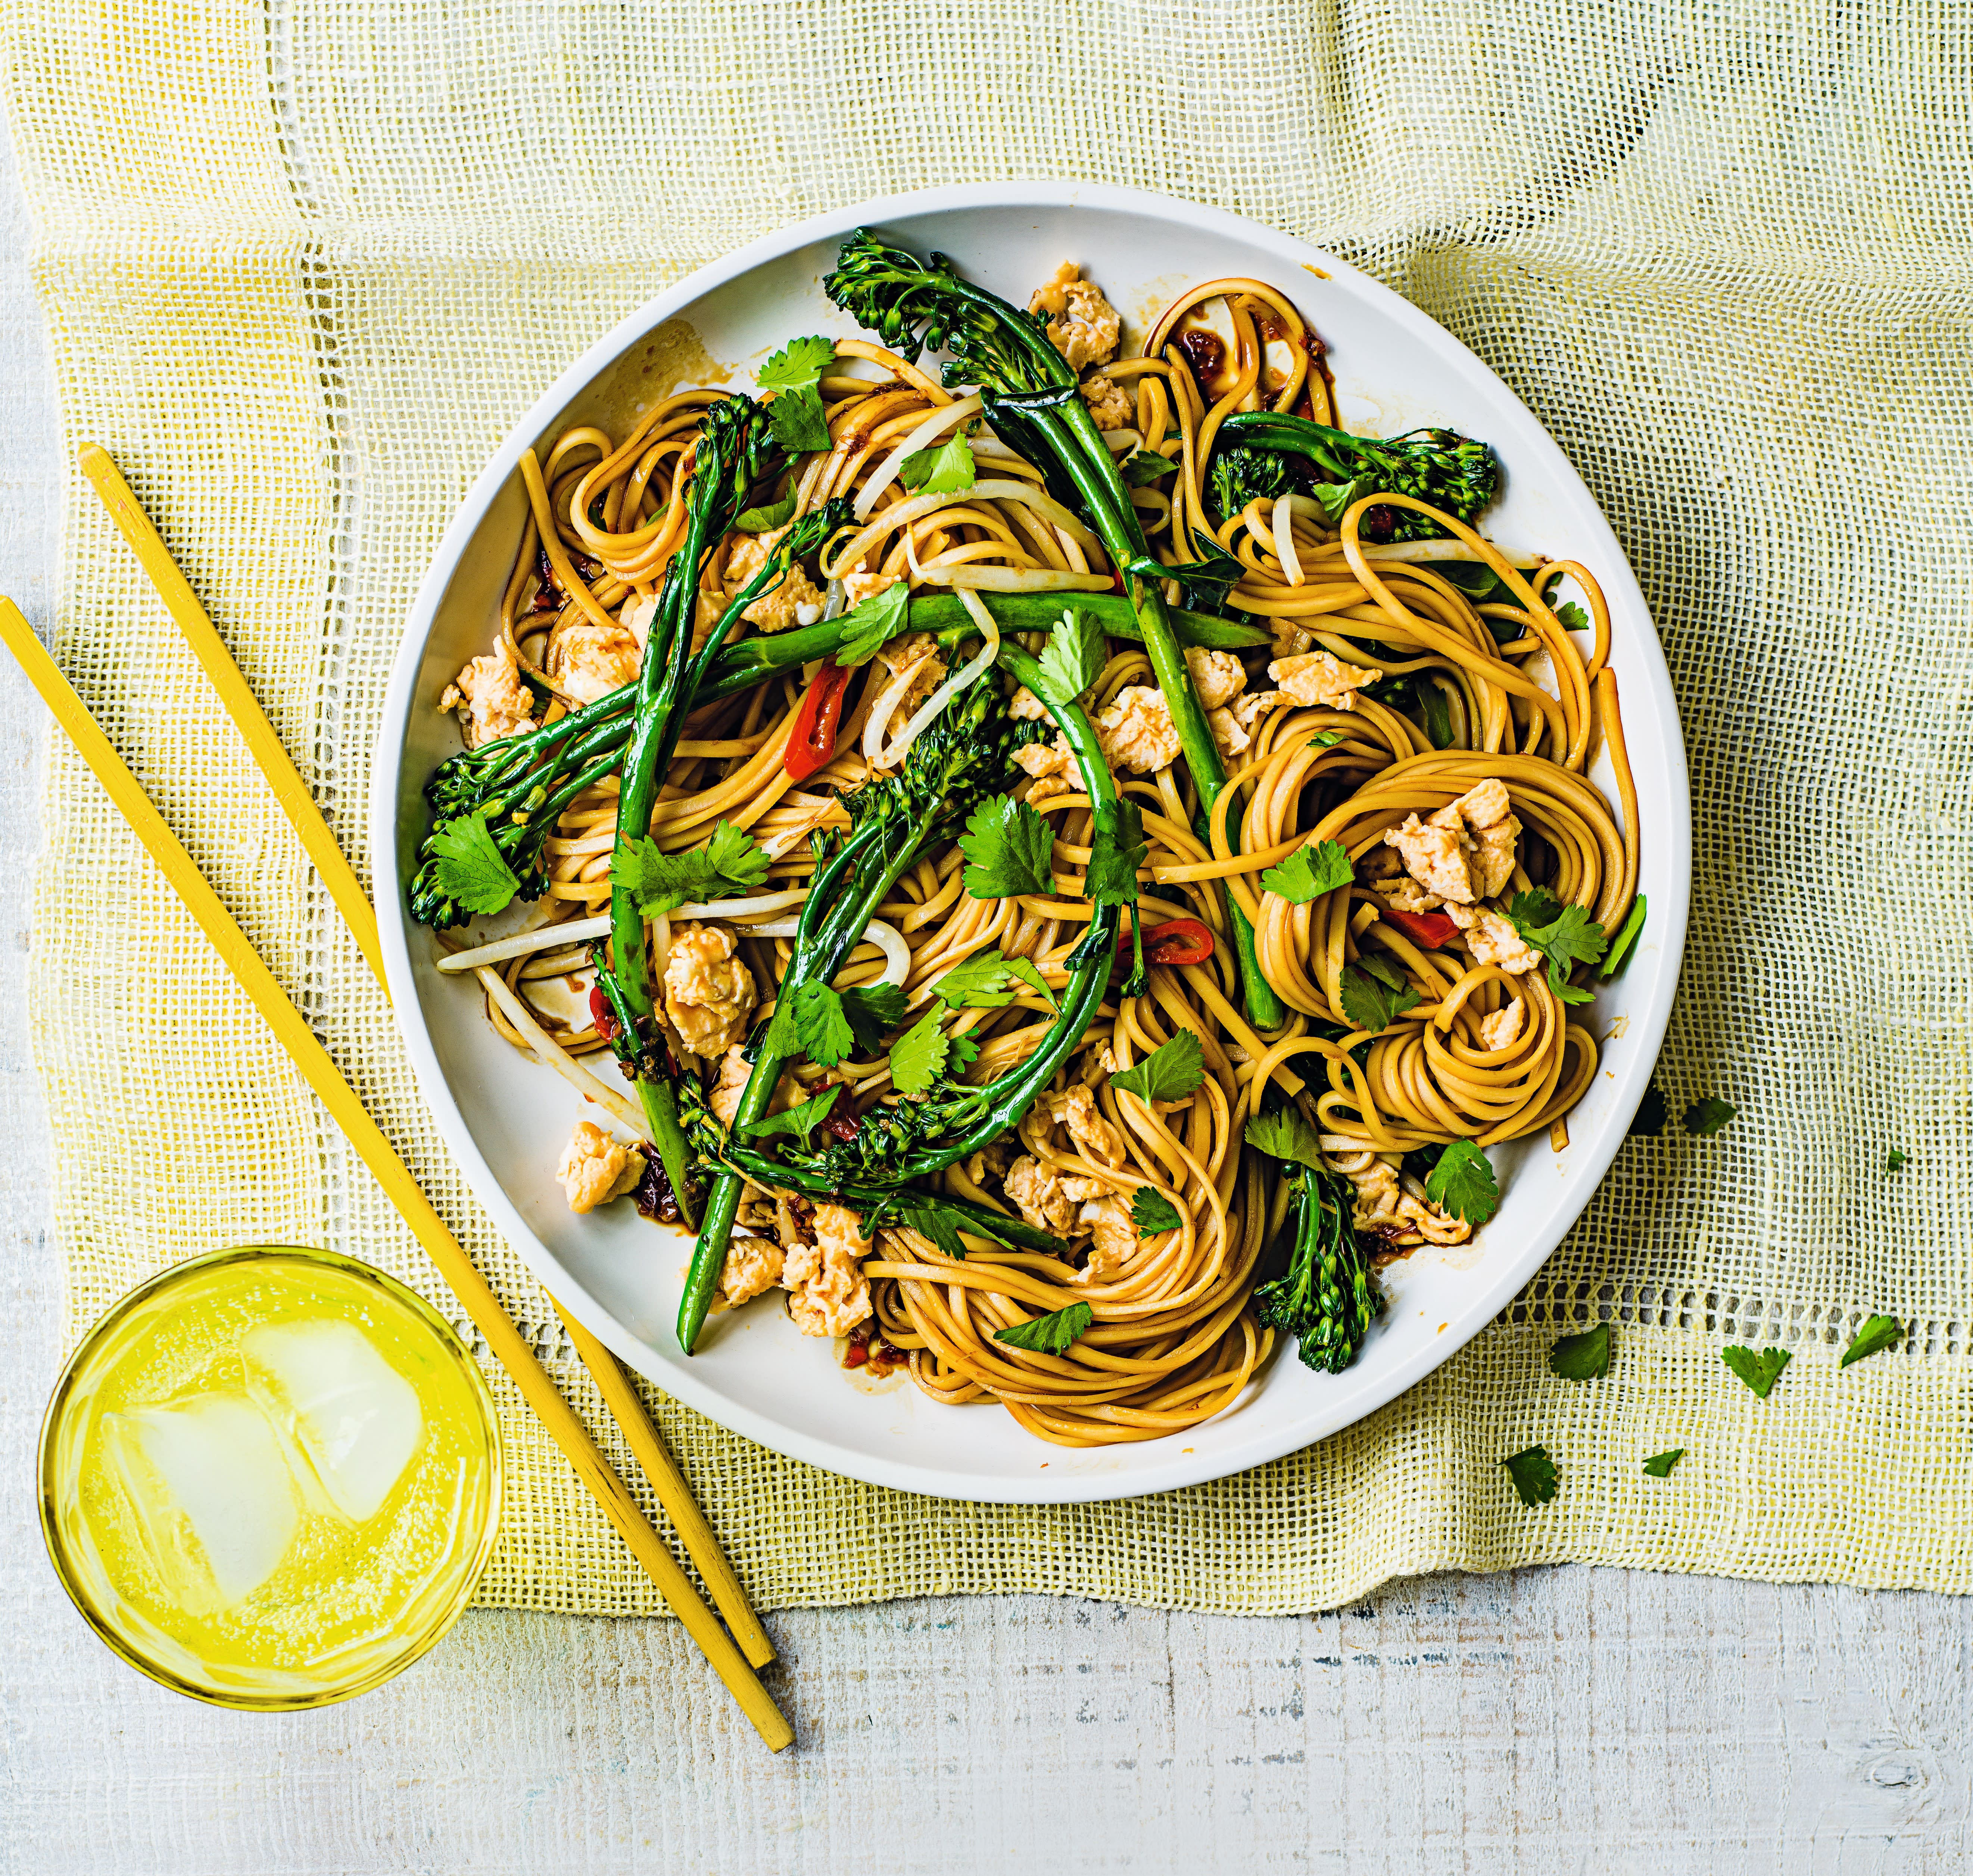 Photo of Egg & broccoli noodles by WW